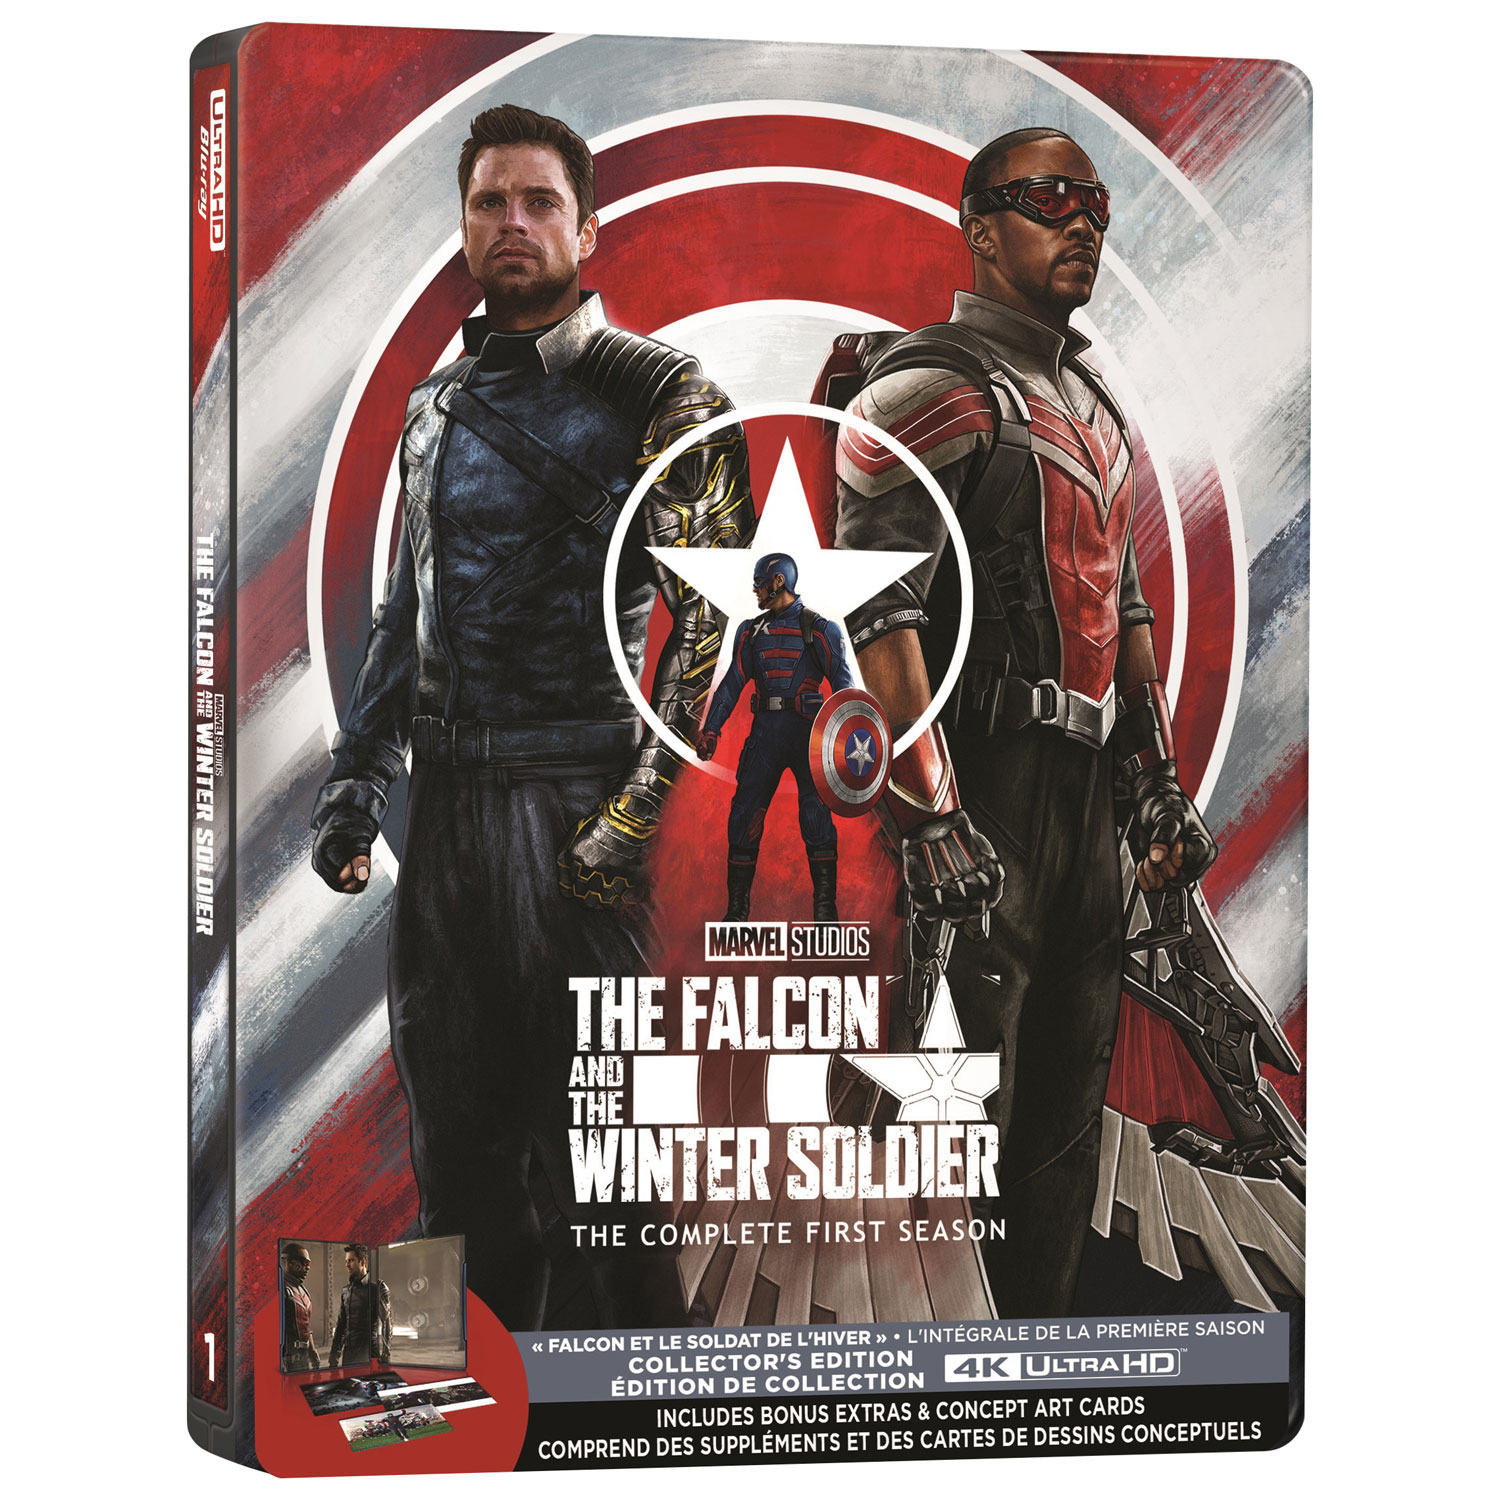 The Falcon and The Winter Soldier: The Complete First Season (4K Ultra HD) (Blu-ray Combo) (2021)